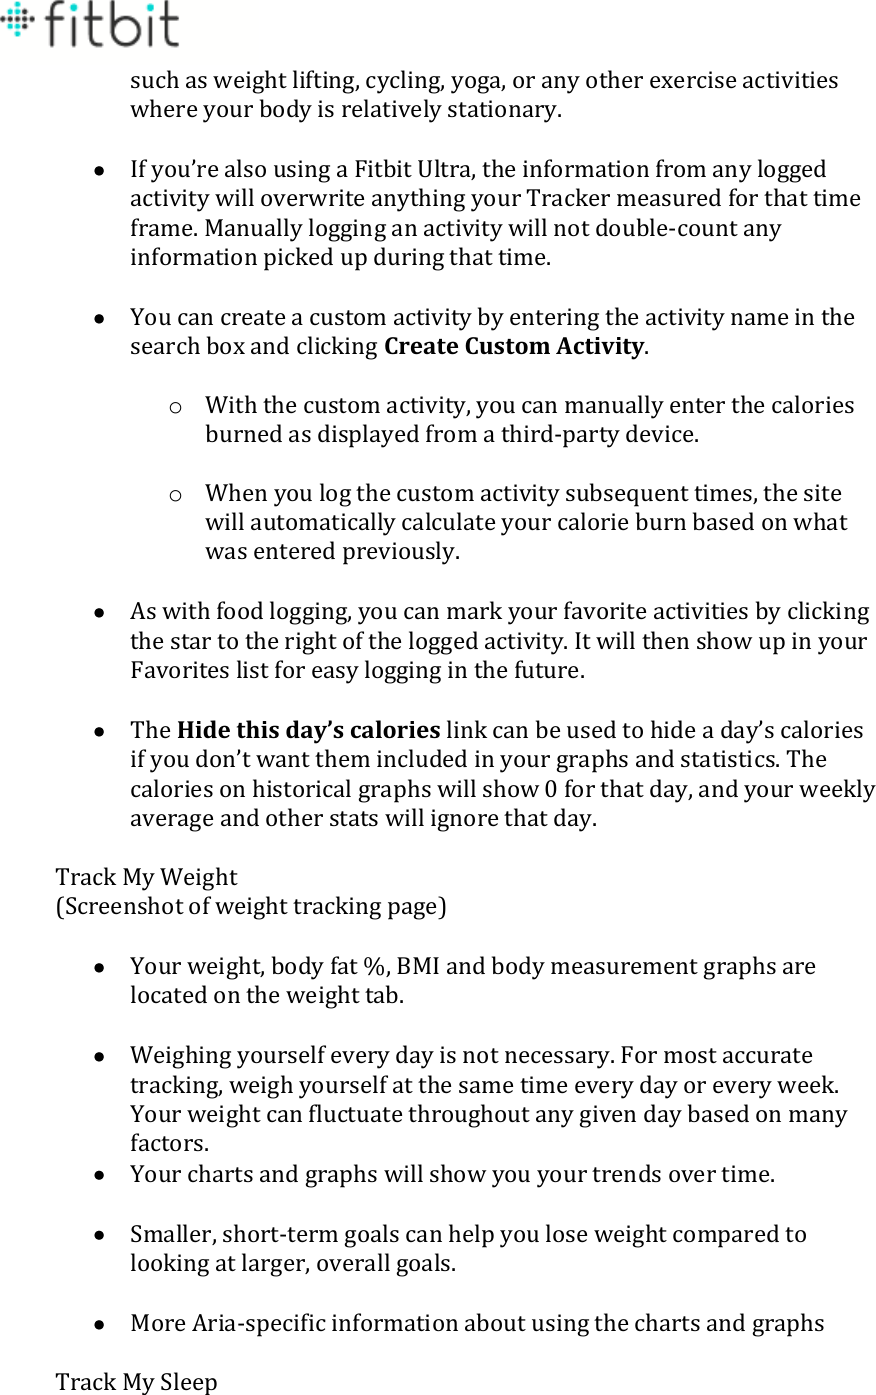  such as weight lifting, cycling, yoga, or any other exercise activities where your body is relatively stationary.   If you’re also using a Fitbit Ultra, the information from any logged activity will overwrite anything your Tracker measured for that time frame. Manually logging an activity will not double-count any information picked up during that time.   You can create a custom activity by entering the activity name in the search box and clicking Create Custom Activity.  o With the custom activity, you can manually enter the calories burned as displayed from a third-party device.  o When you log the custom activity subsequent times, the site will automatically calculate your calorie burn based on what was entered previously.   As with food logging, you can mark your favorite activities by clicking the star to the right of the logged activity. It will then show up in your Favorites list for easy logging in the future.   The Hide this day’s calories link can be used to hide a day’s calories if you don’t want them included in your graphs and statistics. The calories on historical graphs will show 0 for that day, and your weekly average and other stats will ignore that day.  Track My Weight (Screenshot of weight tracking page)   Your weight, body fat %, BMI and body measurement graphs are located on the weight tab.   Weighing yourself every day is not necessary. For most accurate tracking, weigh yourself at the same time every day or every week. Your weight can fluctuate throughout any given day based on many factors.   Your charts and graphs will show you your trends over time.   Smaller, short-term goals can help you lose weight compared to looking at larger, overall goals.   More Aria-specific information about using the charts and graphs  Track My Sleep 